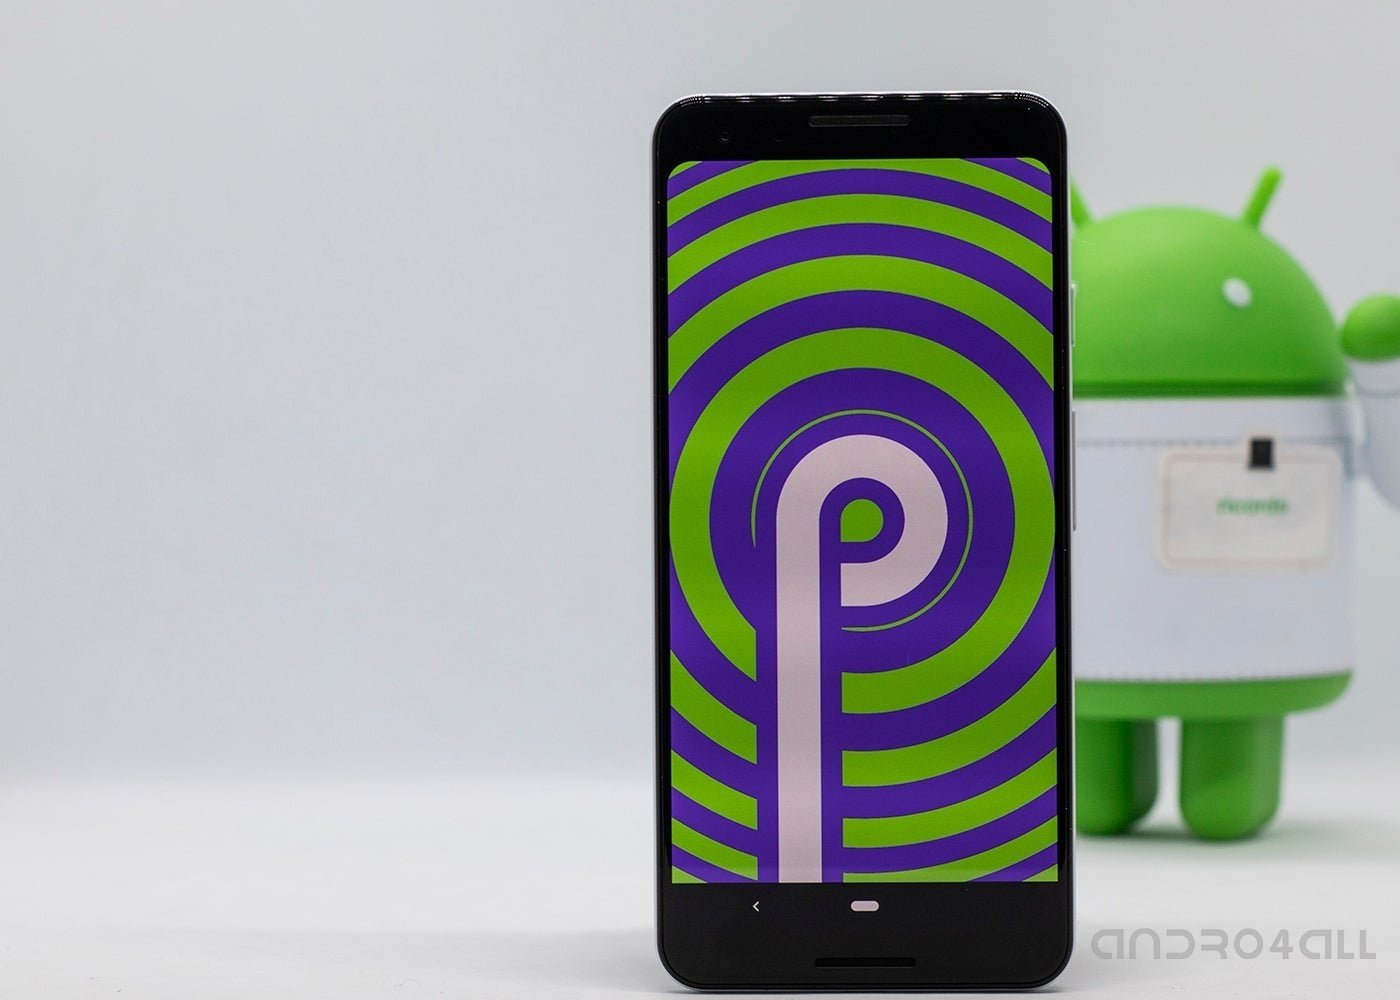 Android Pie approaches Samsung Galaxy S8, S9, Note 8, Note 9 and Note 7 FE